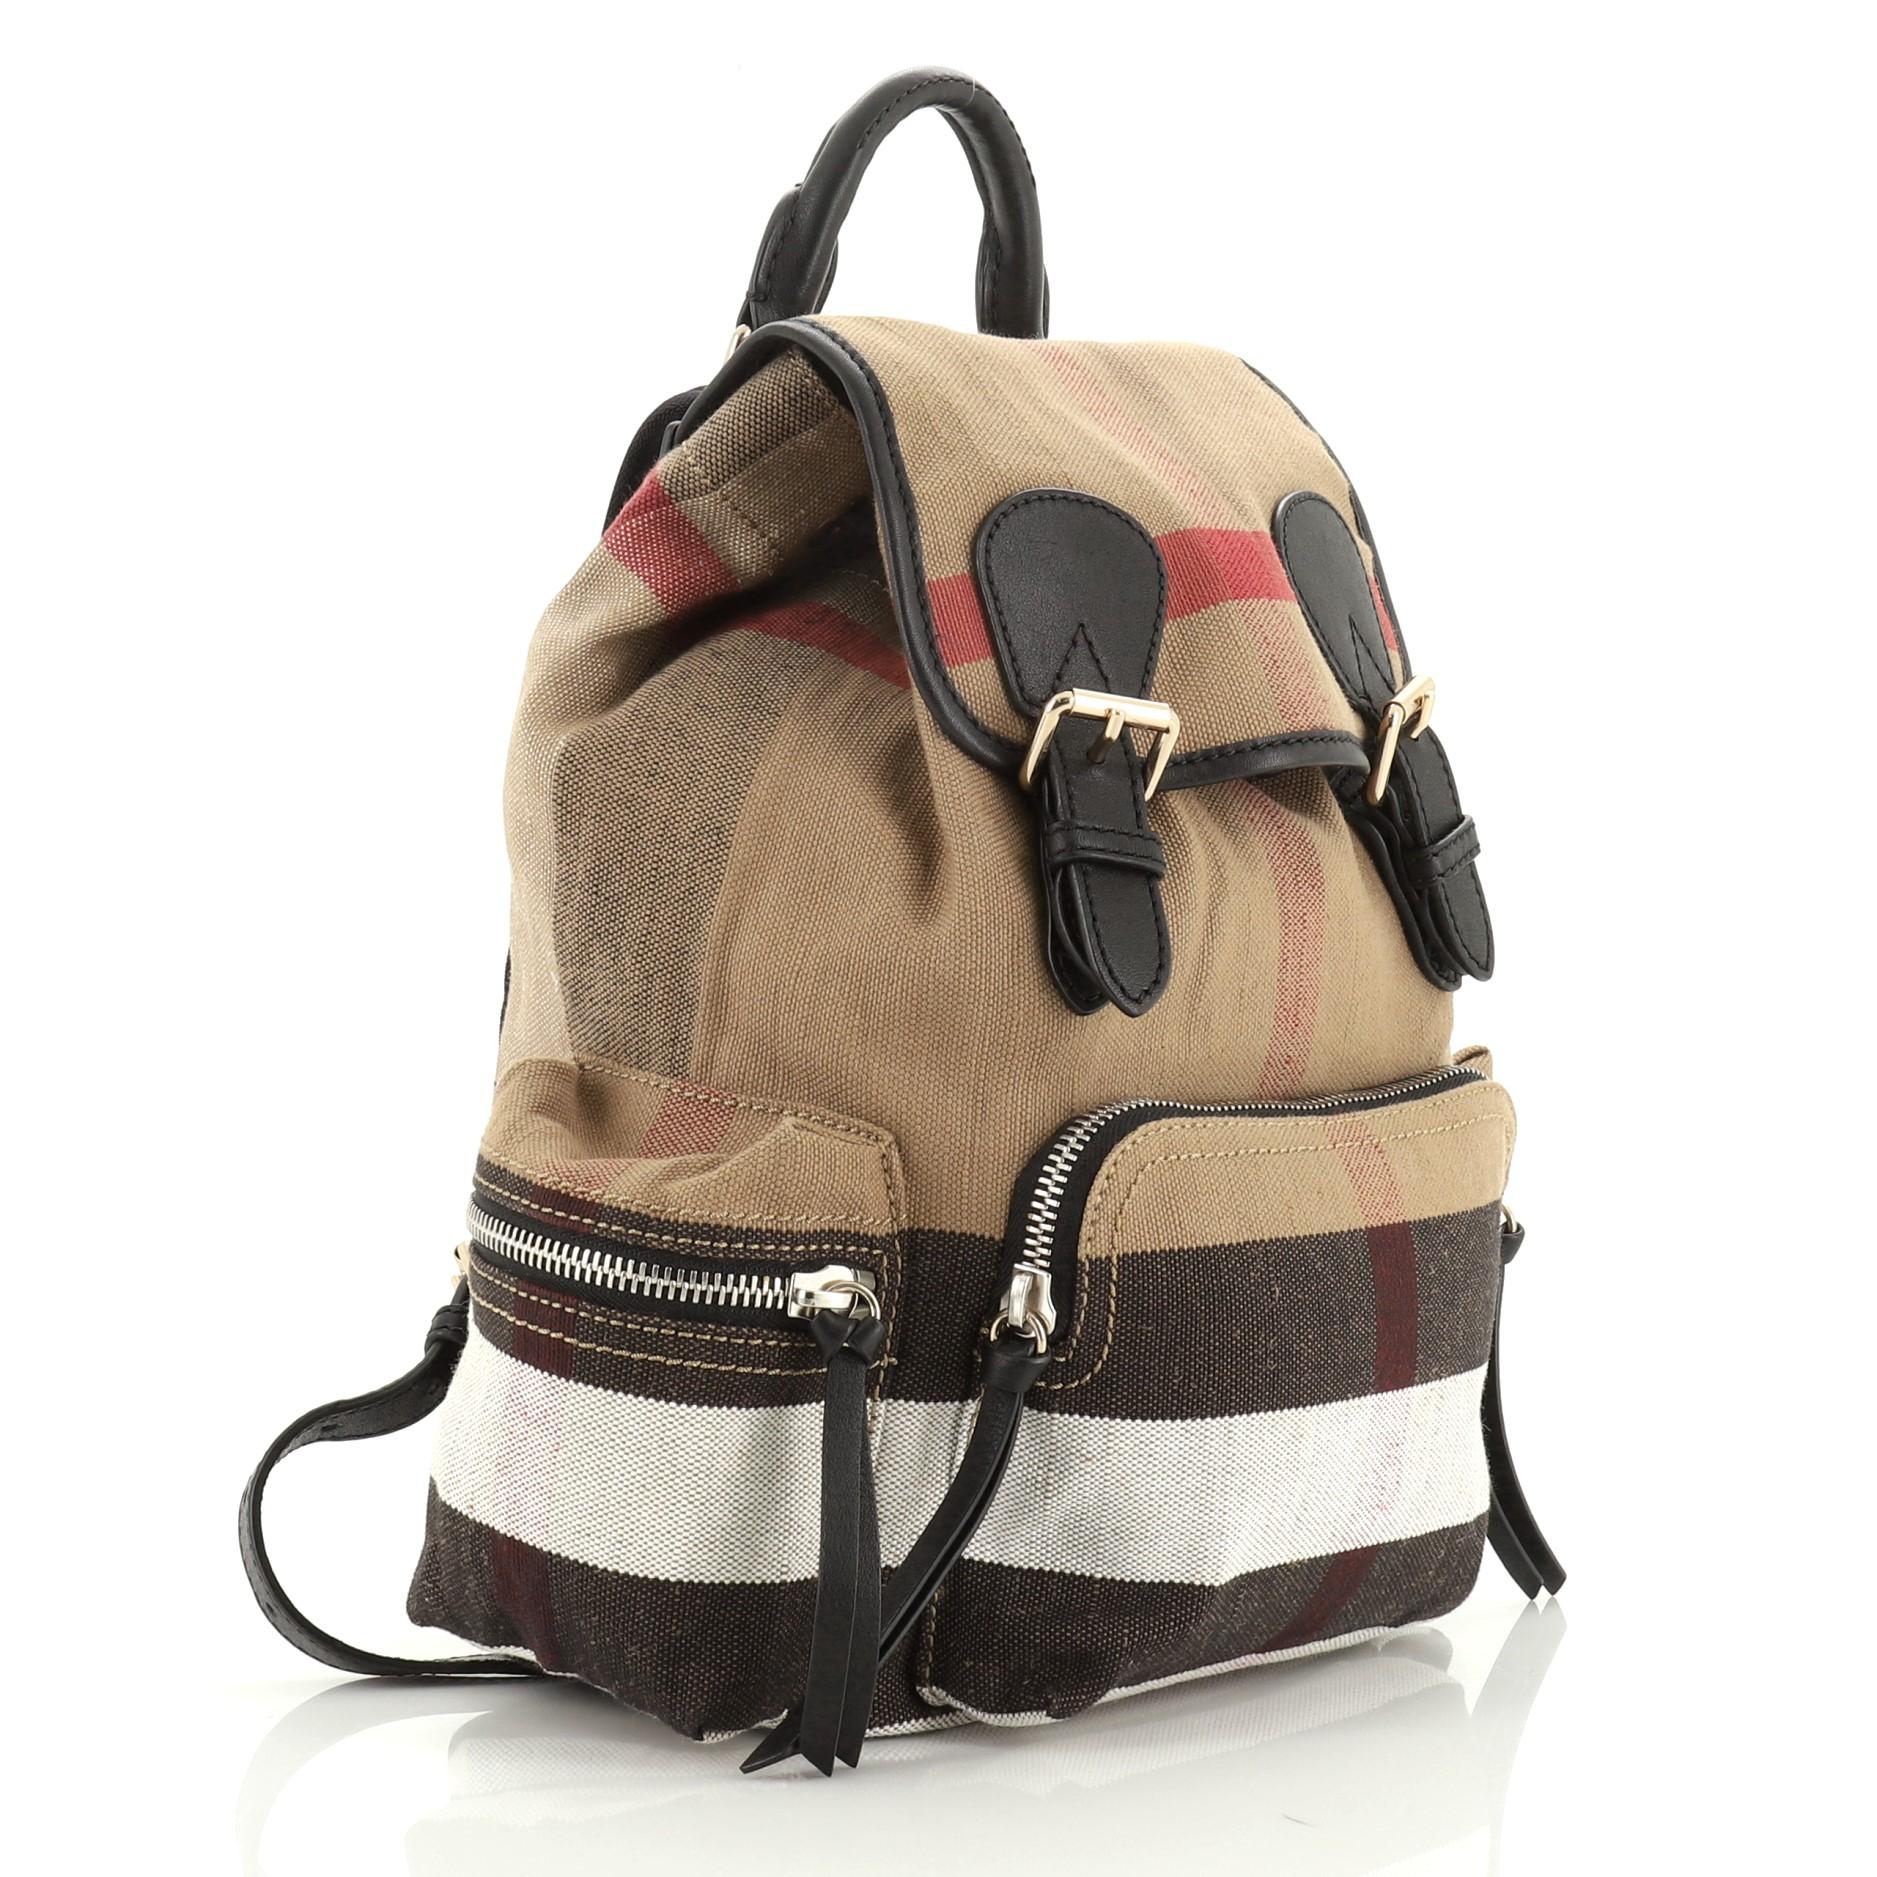 This Burberry Rucksack Backpack House Check Canvas Medium, crafted from multicolor house check canvas, features a leather top handle, adjustable shoulder straps, exterior zip pockets, quilted back panel, and gold and silver-tone hardware. Its